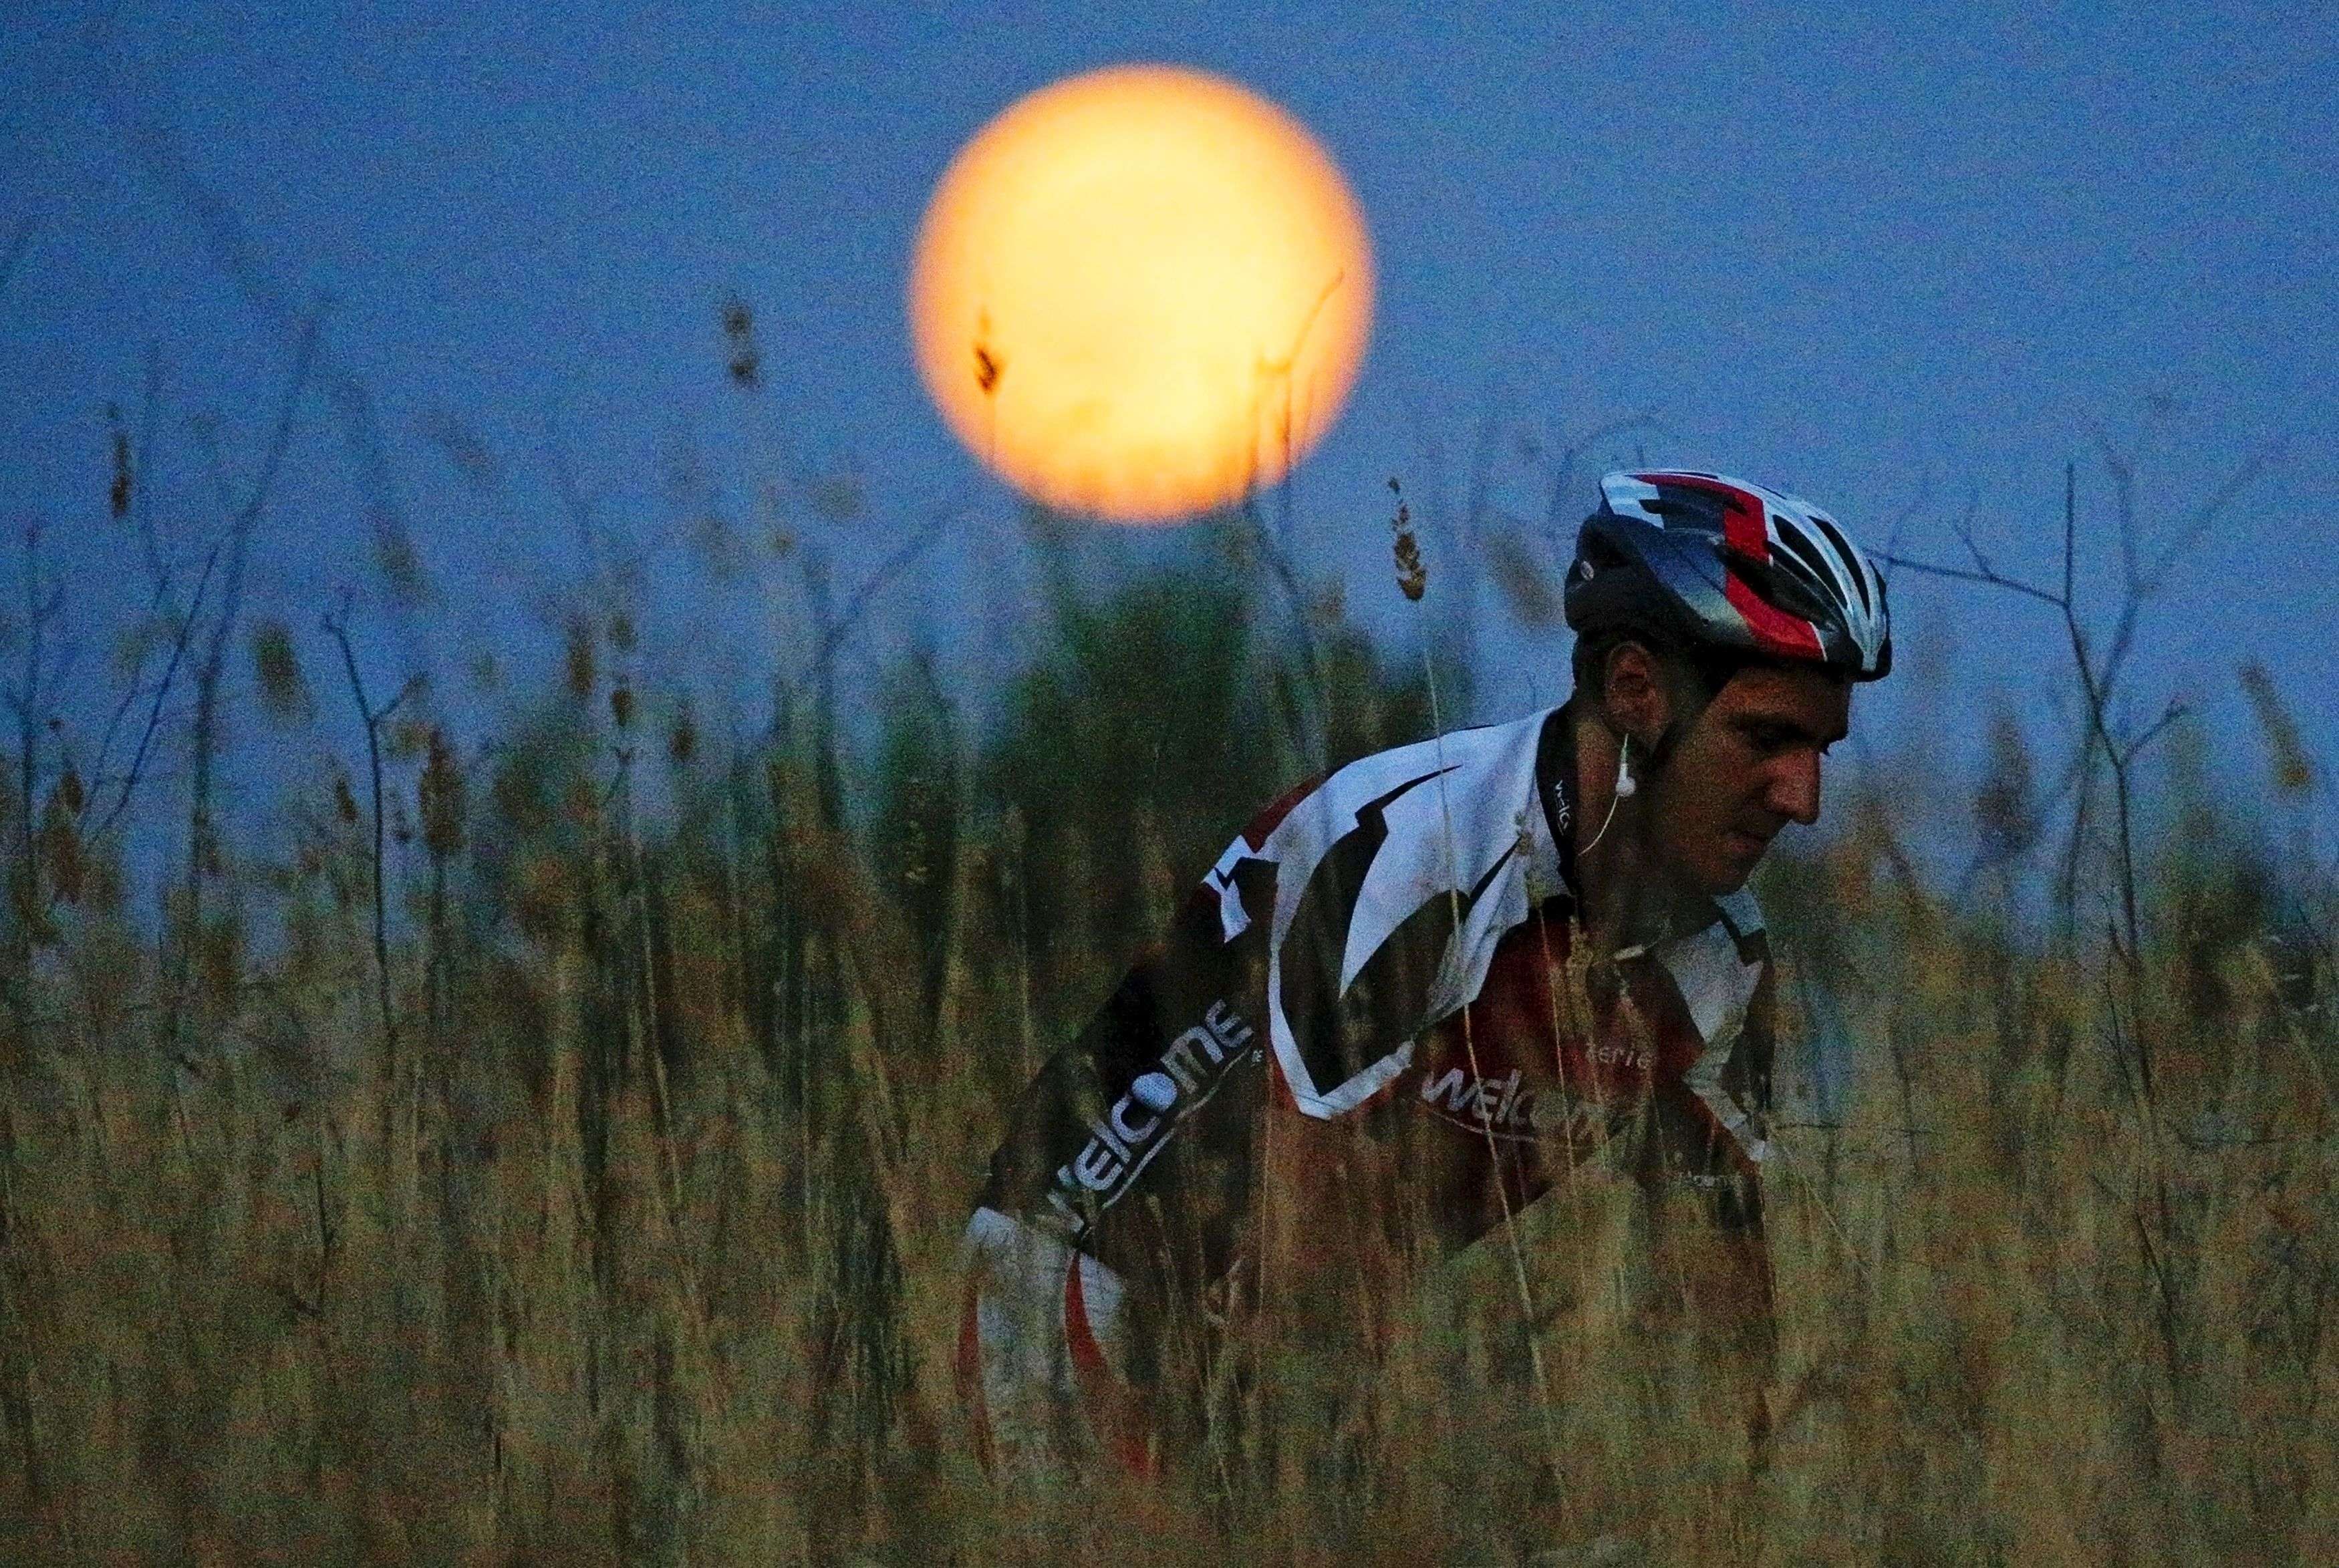 A cyclist rides his mountain bike as a full moon, known as the Blue Moon, rises in a park in Rome, Italy, July 31, 2015. REUTERS/Max Rossi      TPX IMAGES OF THE DAY